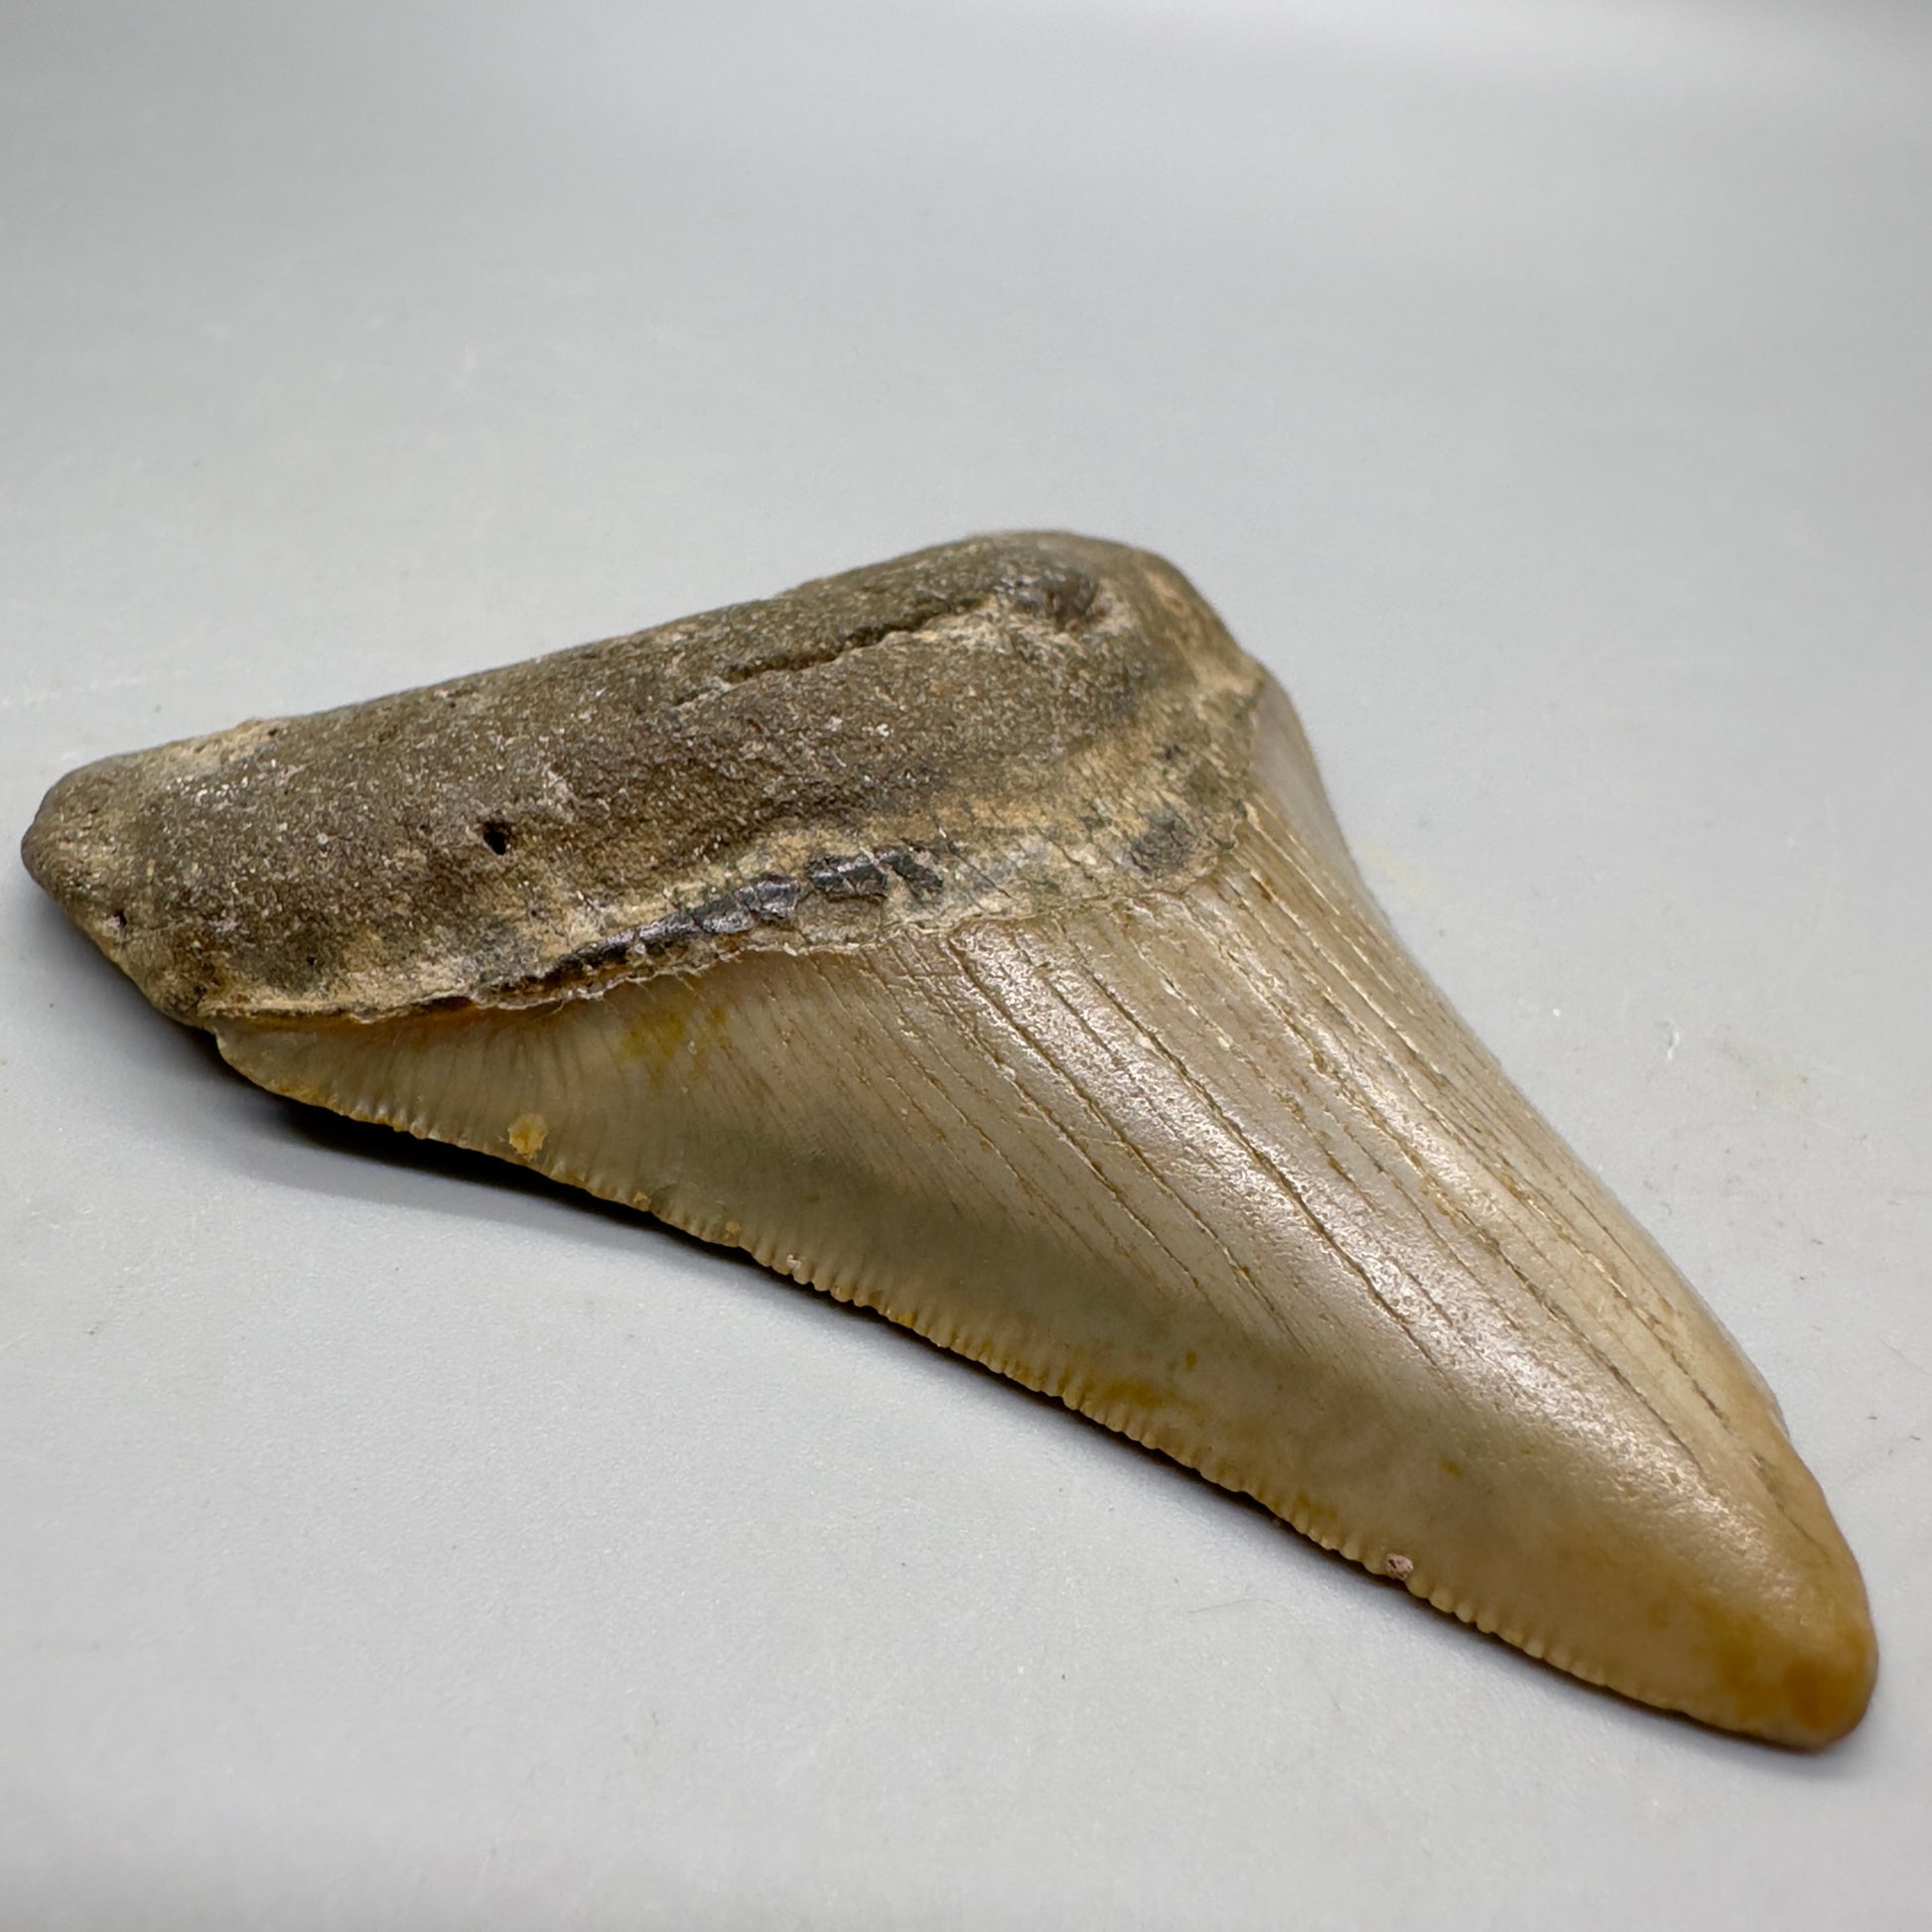 Colorful 3.27" Fossil Megalodon Tooth from North Carolina - Front left